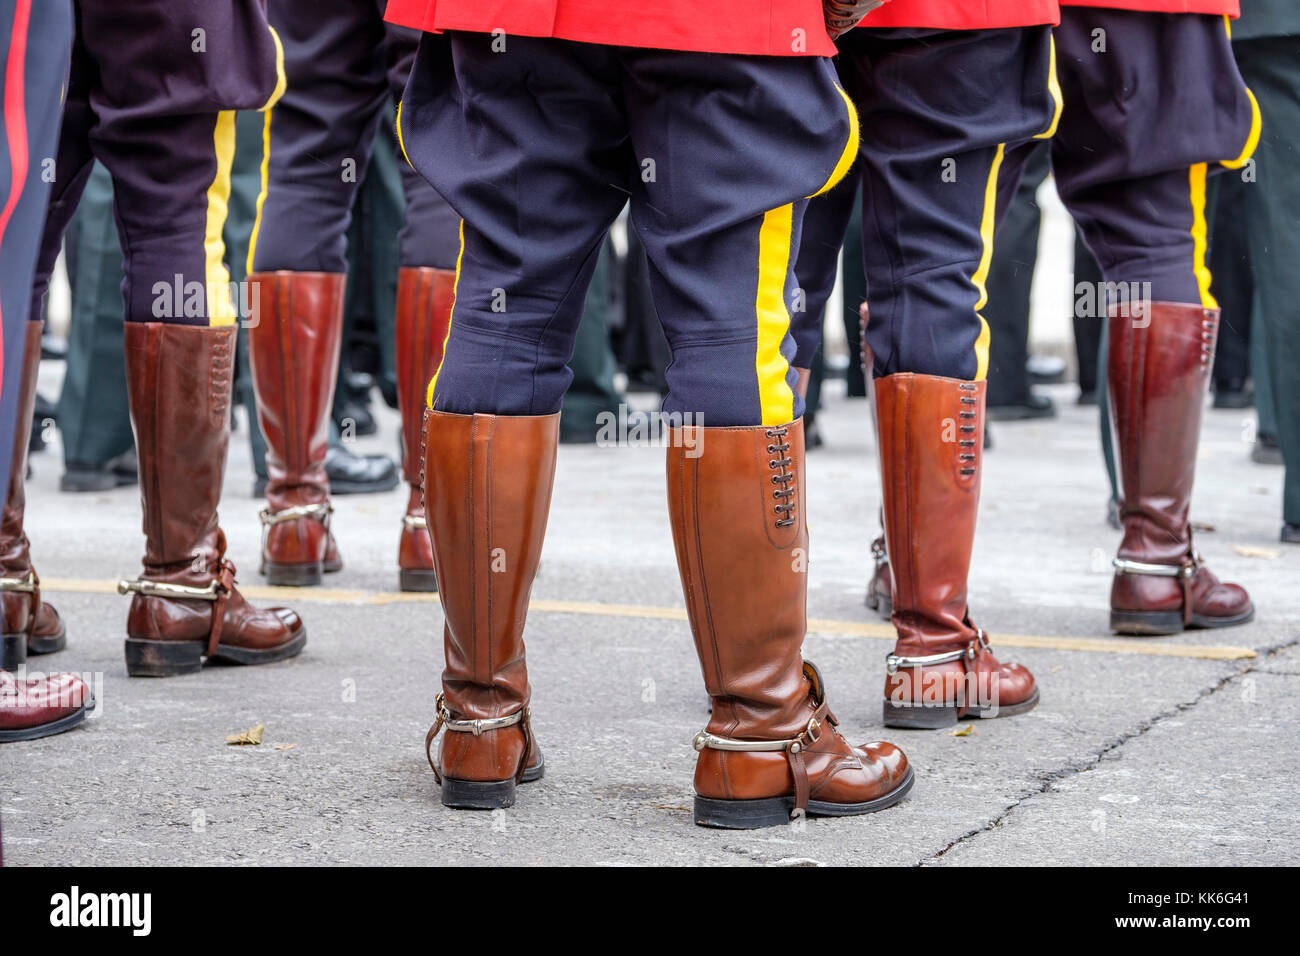 Close-up of mounties, Royal Canadian Mounted Police (RCMP) officer boots in line, Remembrance Day, London, Ontario, Canada. Stock Photo